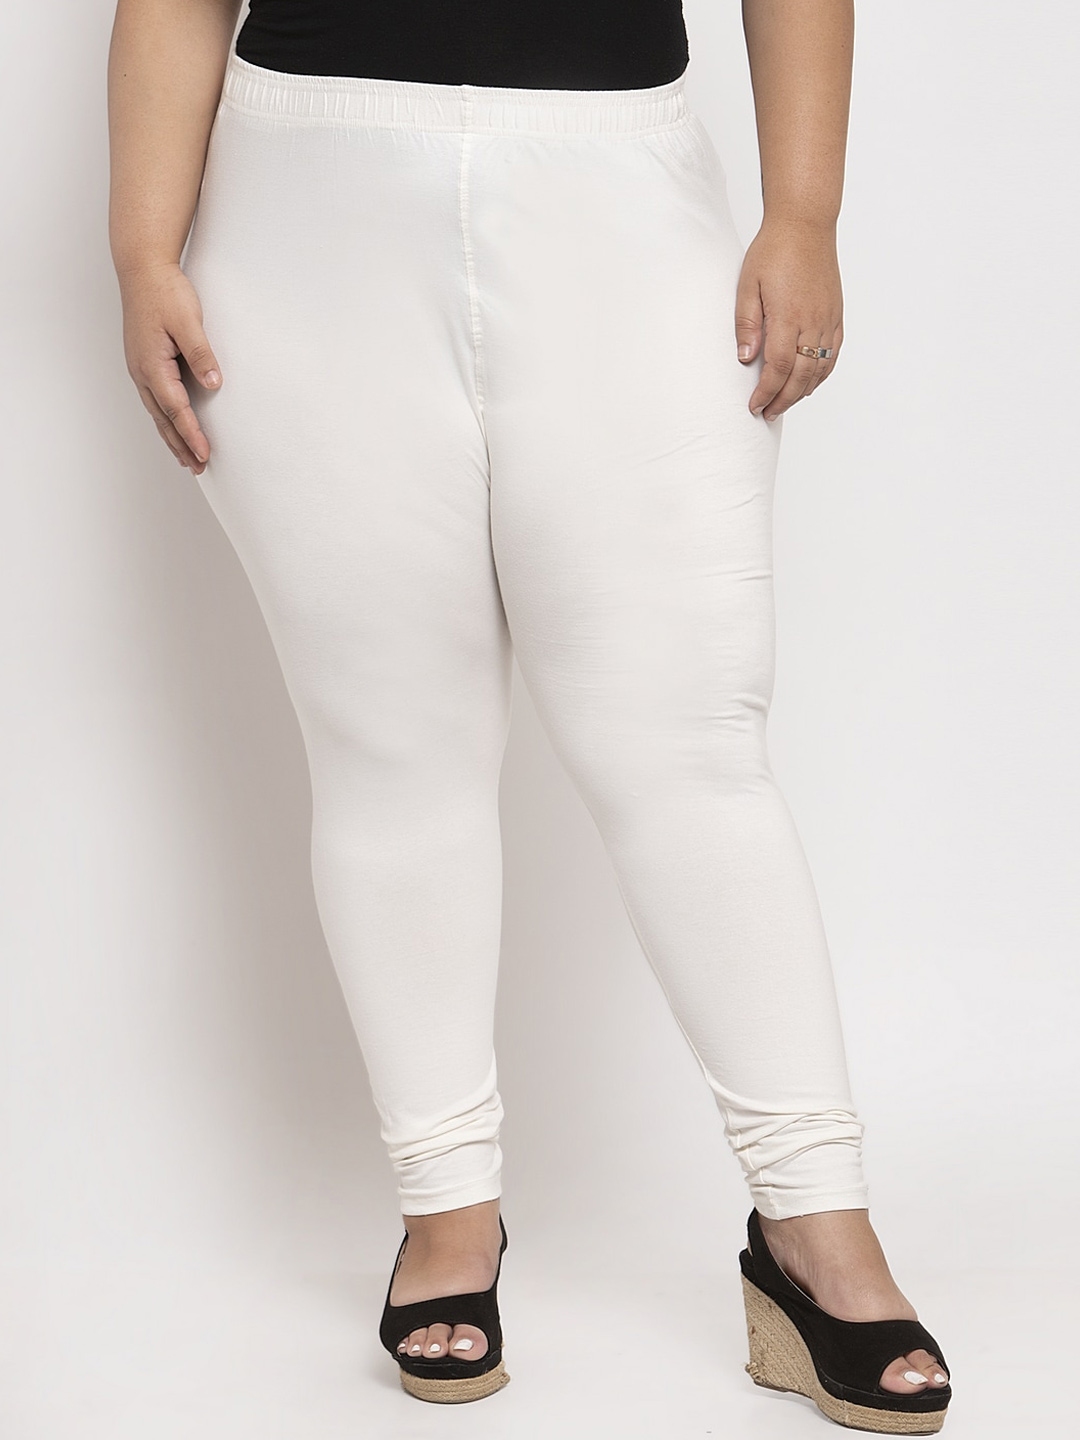 Churidar leggings in white, gathered at the ankle, one size fits most